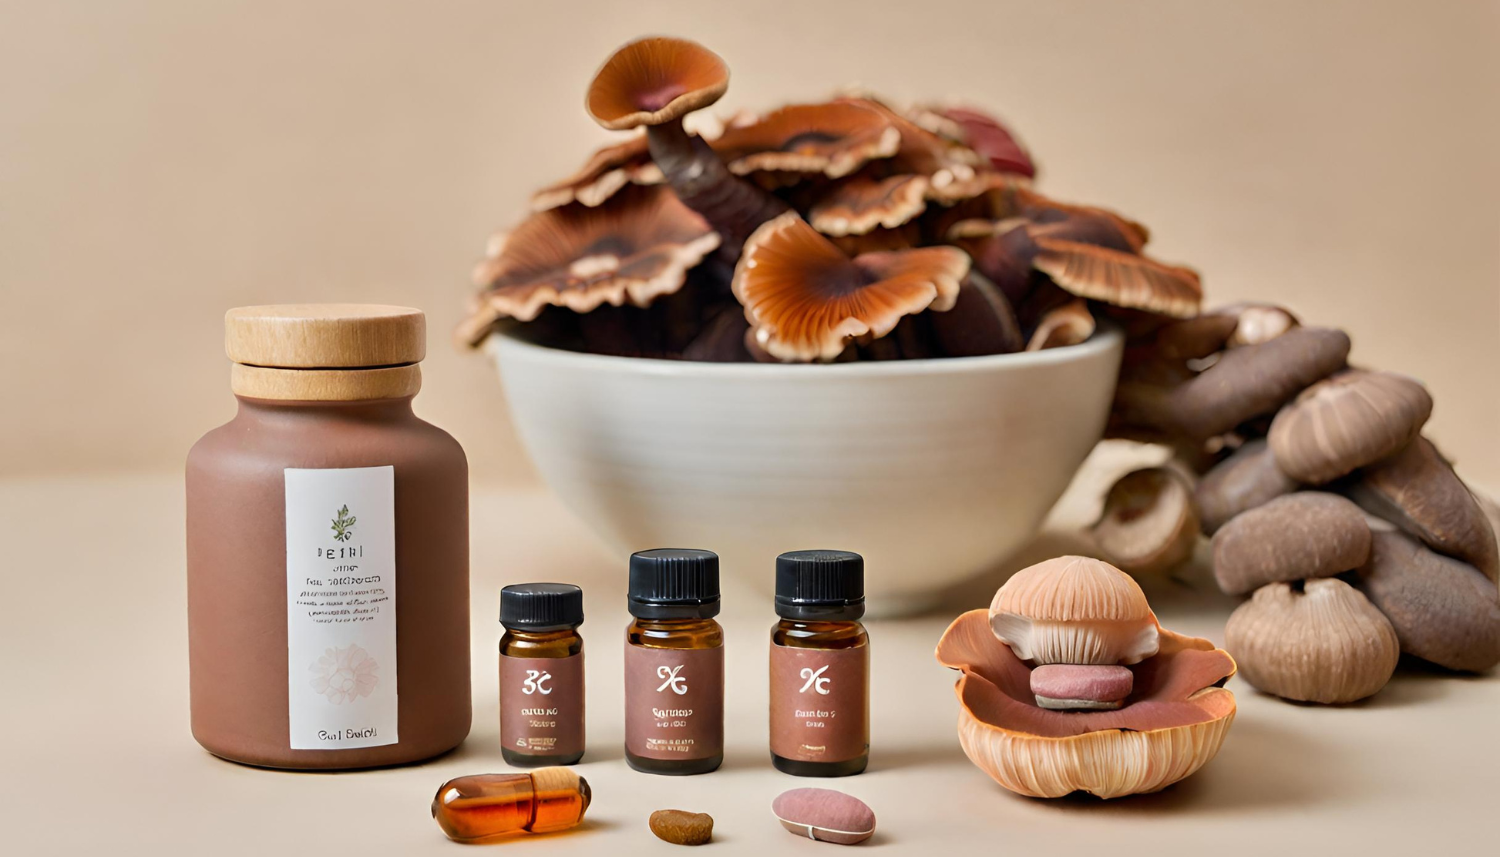 The different forms of Reishi